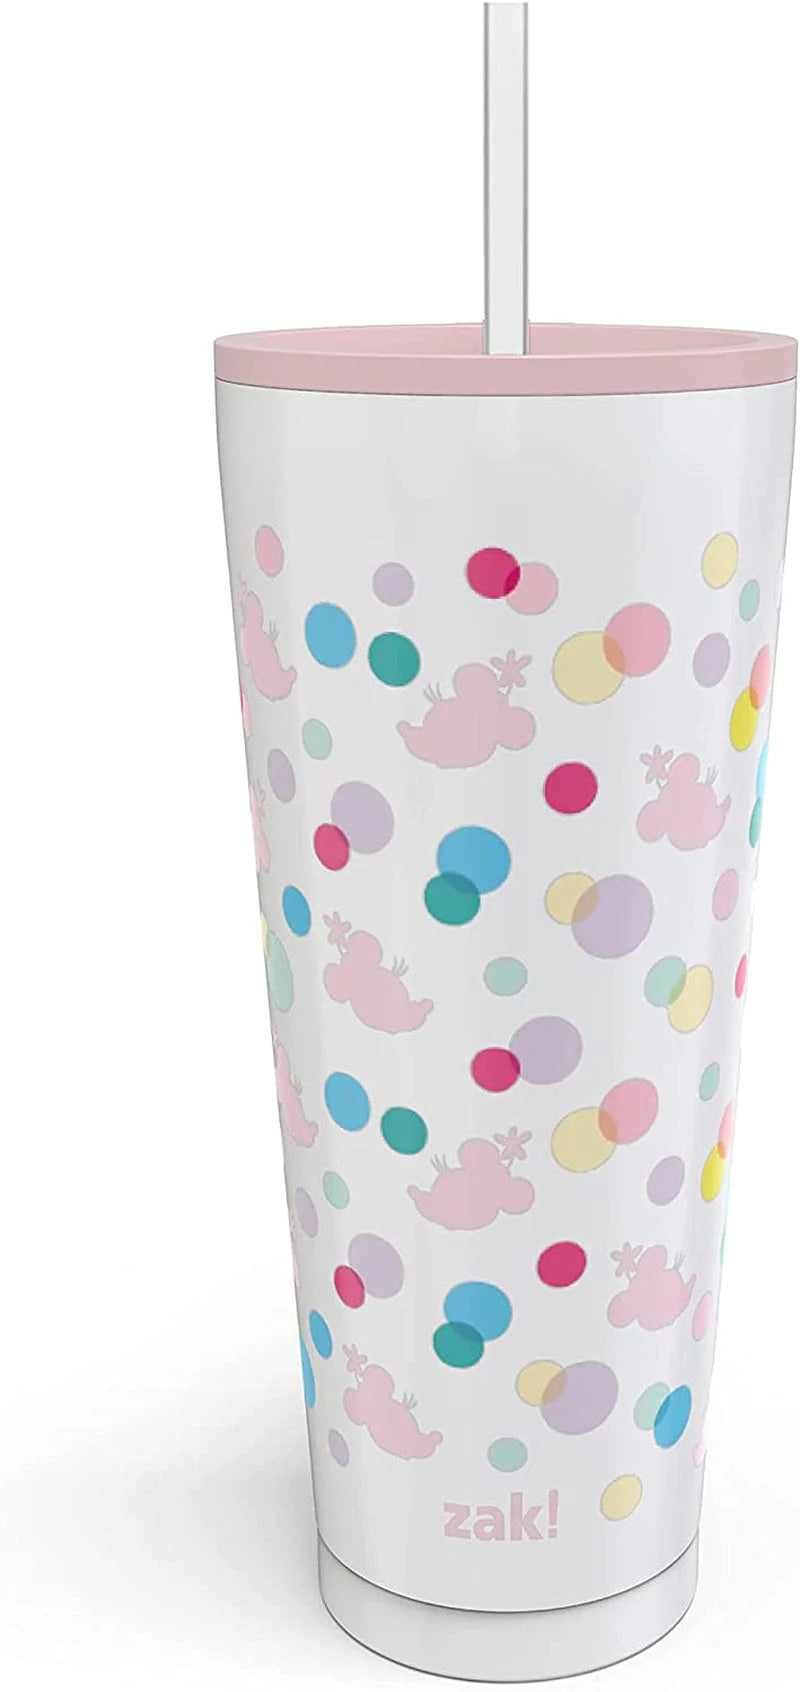 Zak Designs Sanrio Hello Kitty Vacuum Insulated Stainless Steel Travel Tumbler with Splash-Proof Lid, Includes Reusable Plastic Straw and Fits in Car Cup Holders (18/8 SS, 25 Oz) Home & Garden > Kitchen & Dining > Tableware > Drinkware Zak Designs Minnie Mouse-Dots 1 Count (Pack of 1) 